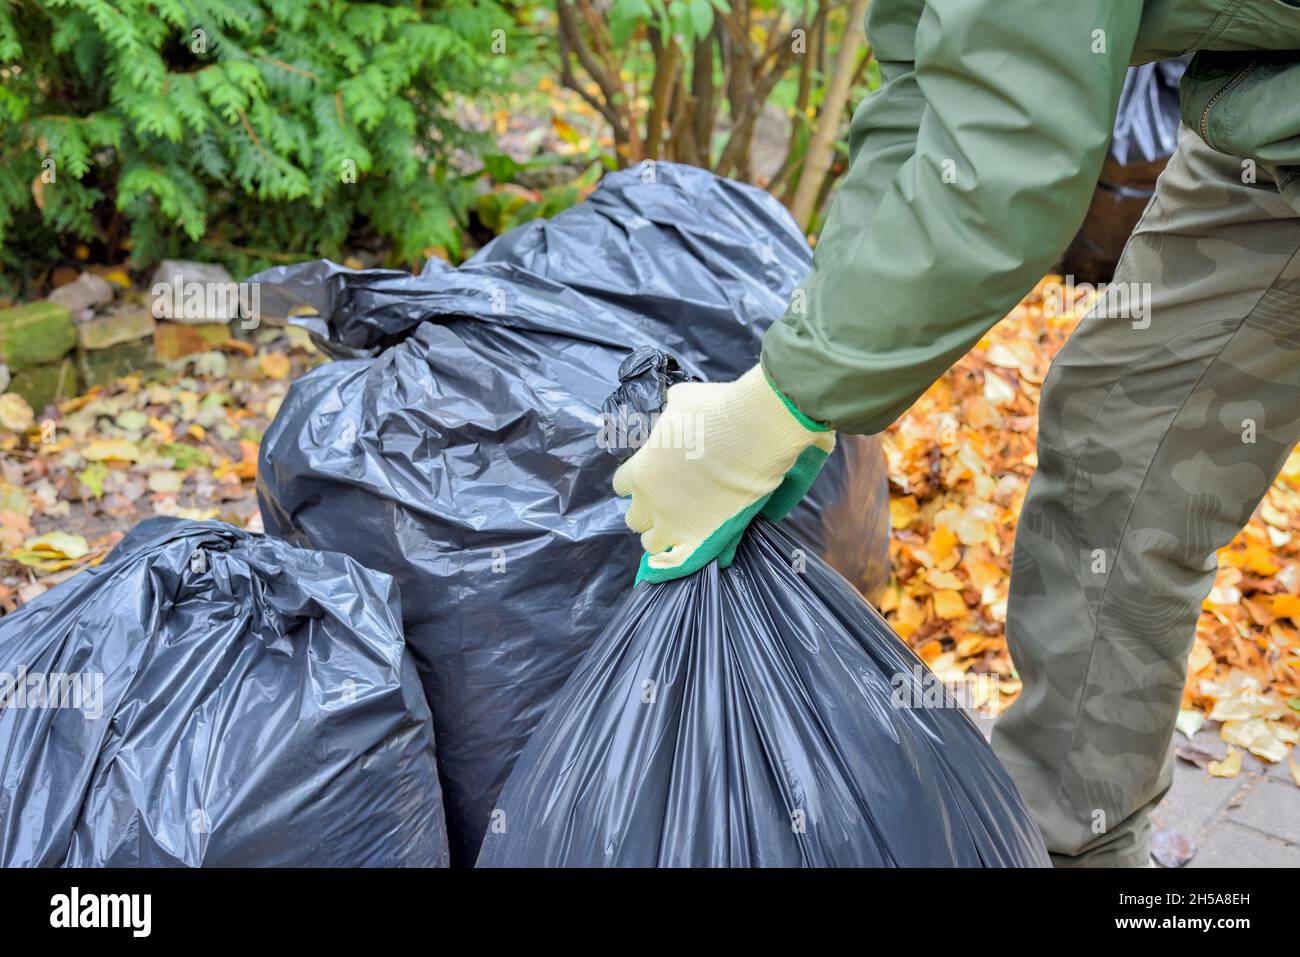 https://c8.alamy.com/comp/2H5A8EH/garden-worker-gloved-hands-and-black-plastic-bags-with-collected-leaves-while-cleaning-the-yard-2H5A8EH.jpg